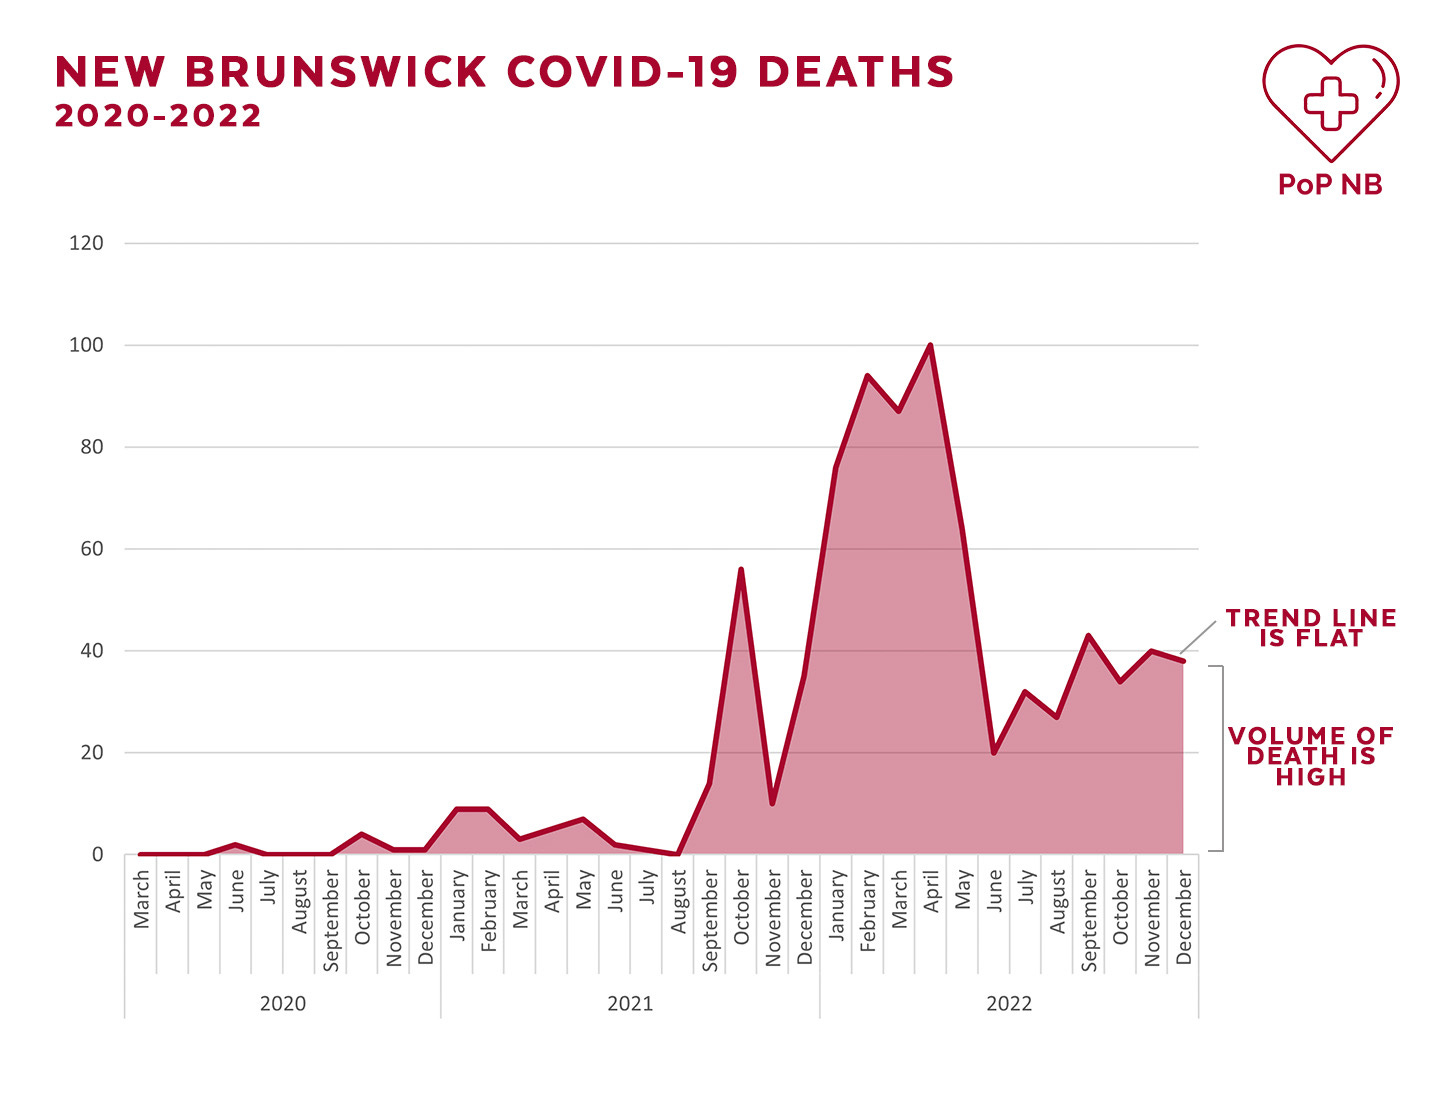 A chart of New Brunswick Covid-19 deaths for the years 2020, 2021, and 2022. The area below the line is shaded, illustrating how even though the trend line of deaths over time is not going up, the volume of death below the trend line is continuously and unacceptably high.